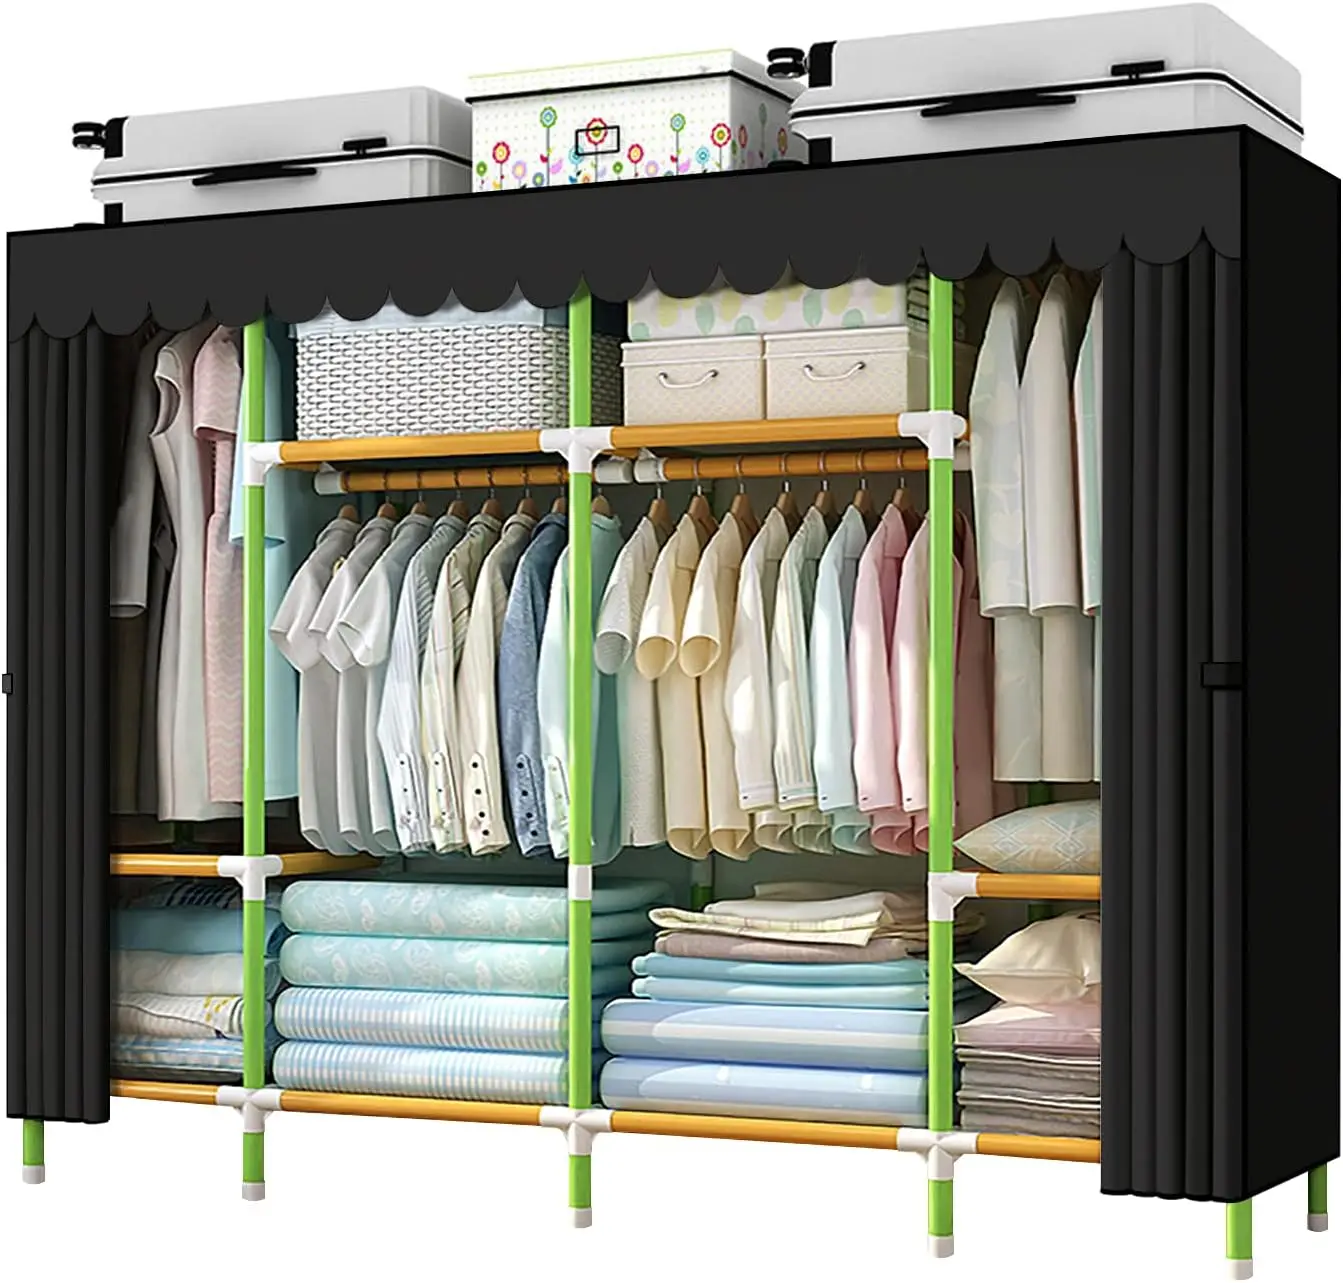 

YOUUD Portable Closet 79 Inches Portable Wardrobe Closet for Hanging Clothes with 4 Handing Rods 25mm Colored Iron Tube and